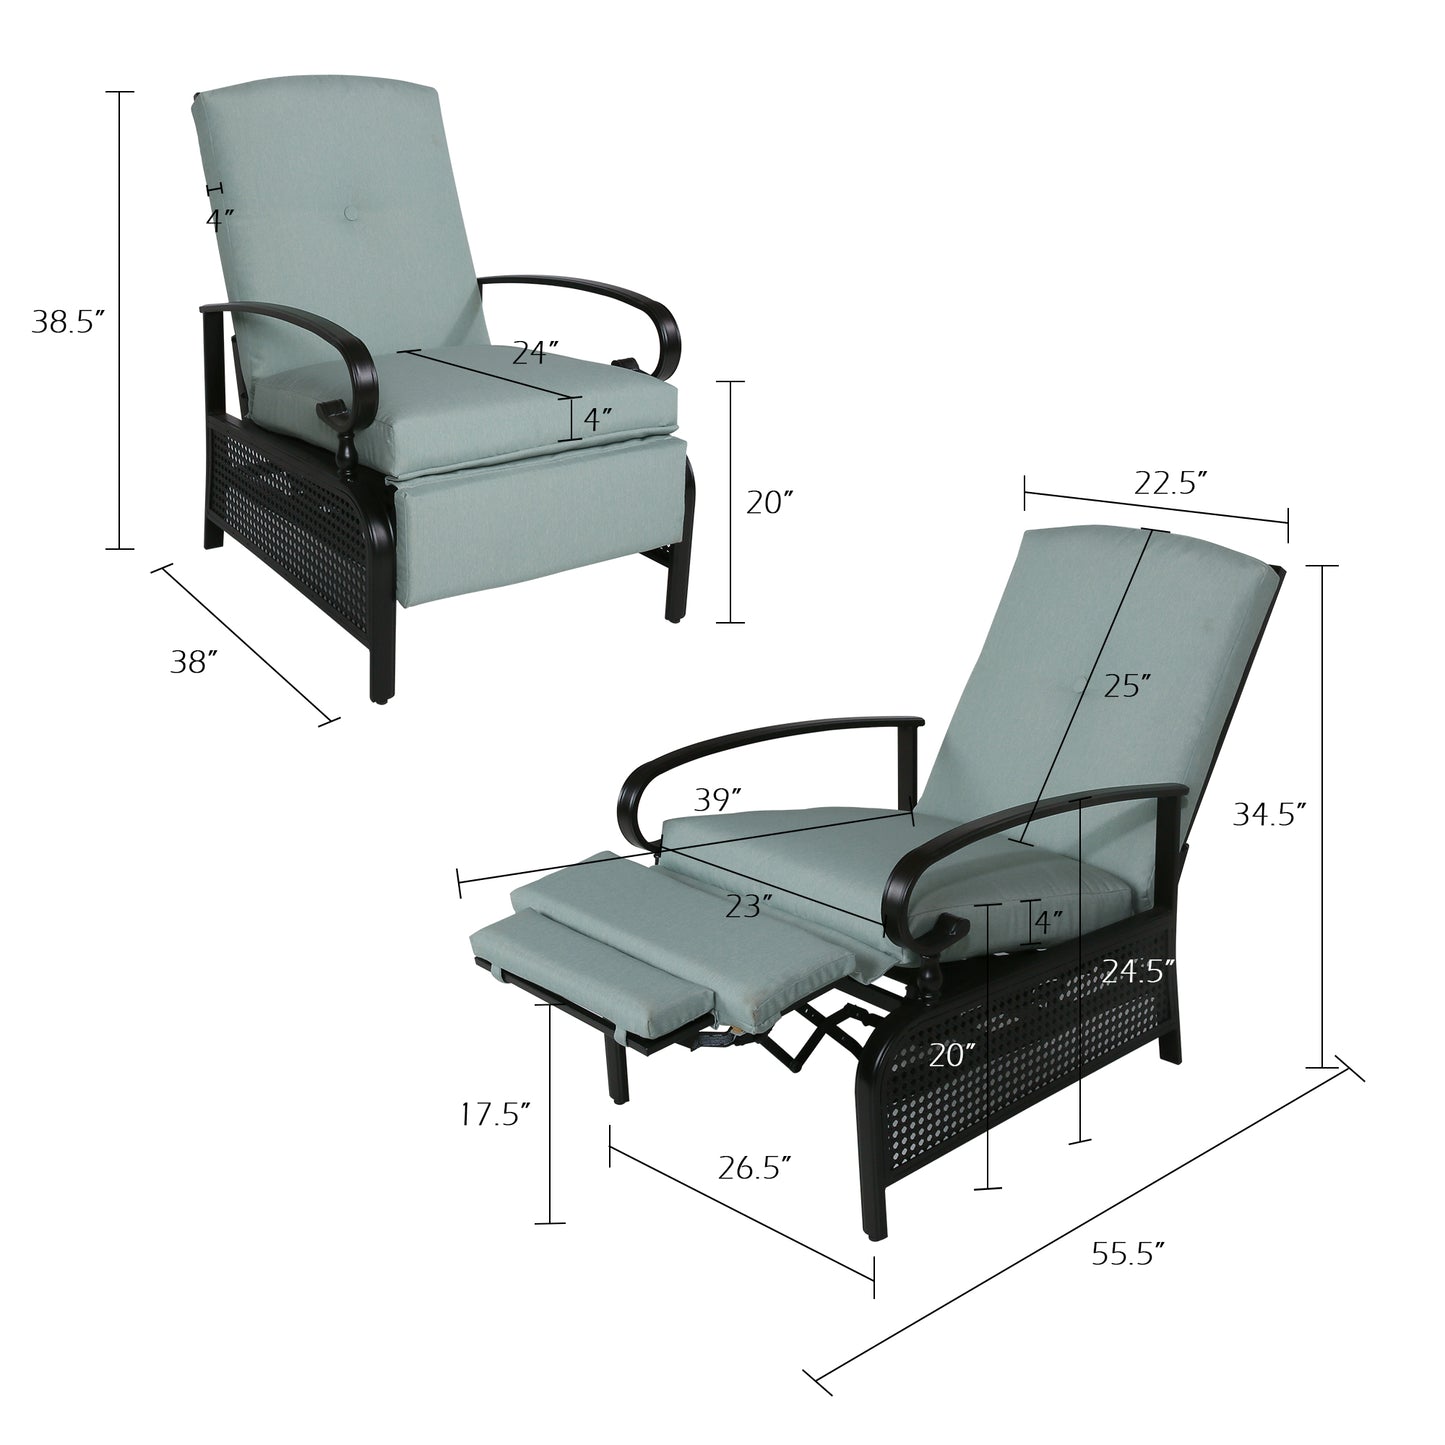 Outdoor Recliner Chair Adjustable Patio Reclining Lounge Chair with 100% Olefin Cushion (Mist)